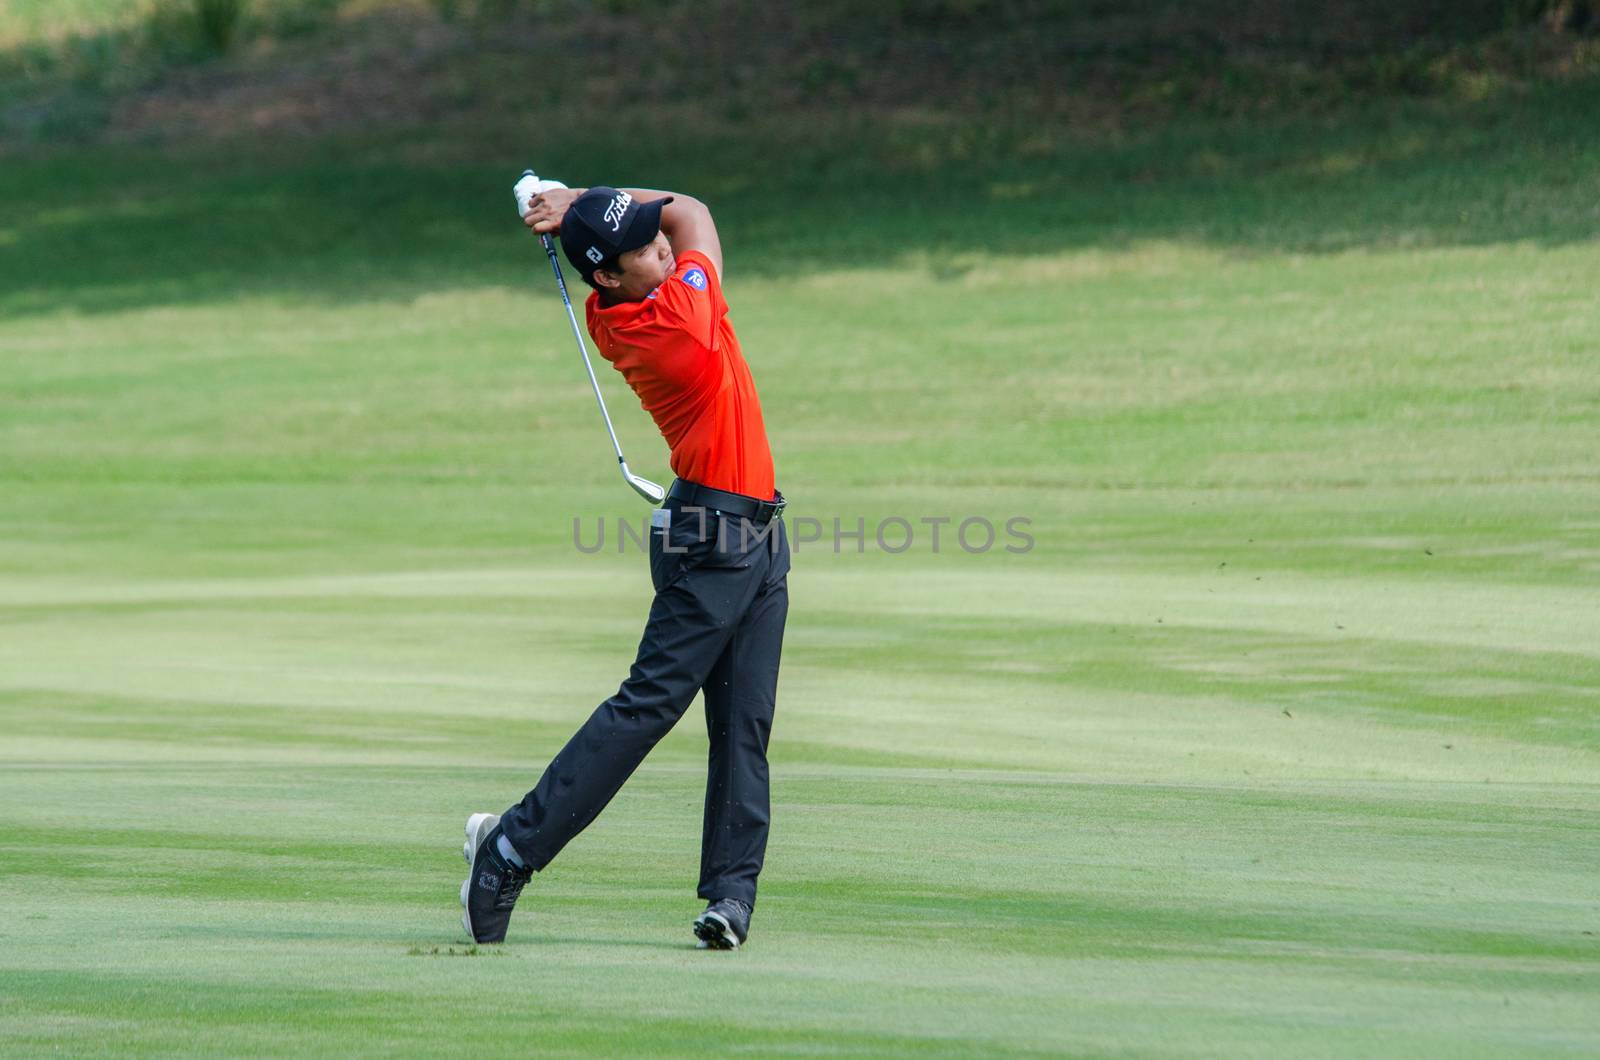 CHONBURI - DECEMBER 13 : Natipong Srithong of Thailand player in Thailand Golf Championship 2015 at Amata Spring Country Club on December 13, 2015 in Chonburi, Thailand.